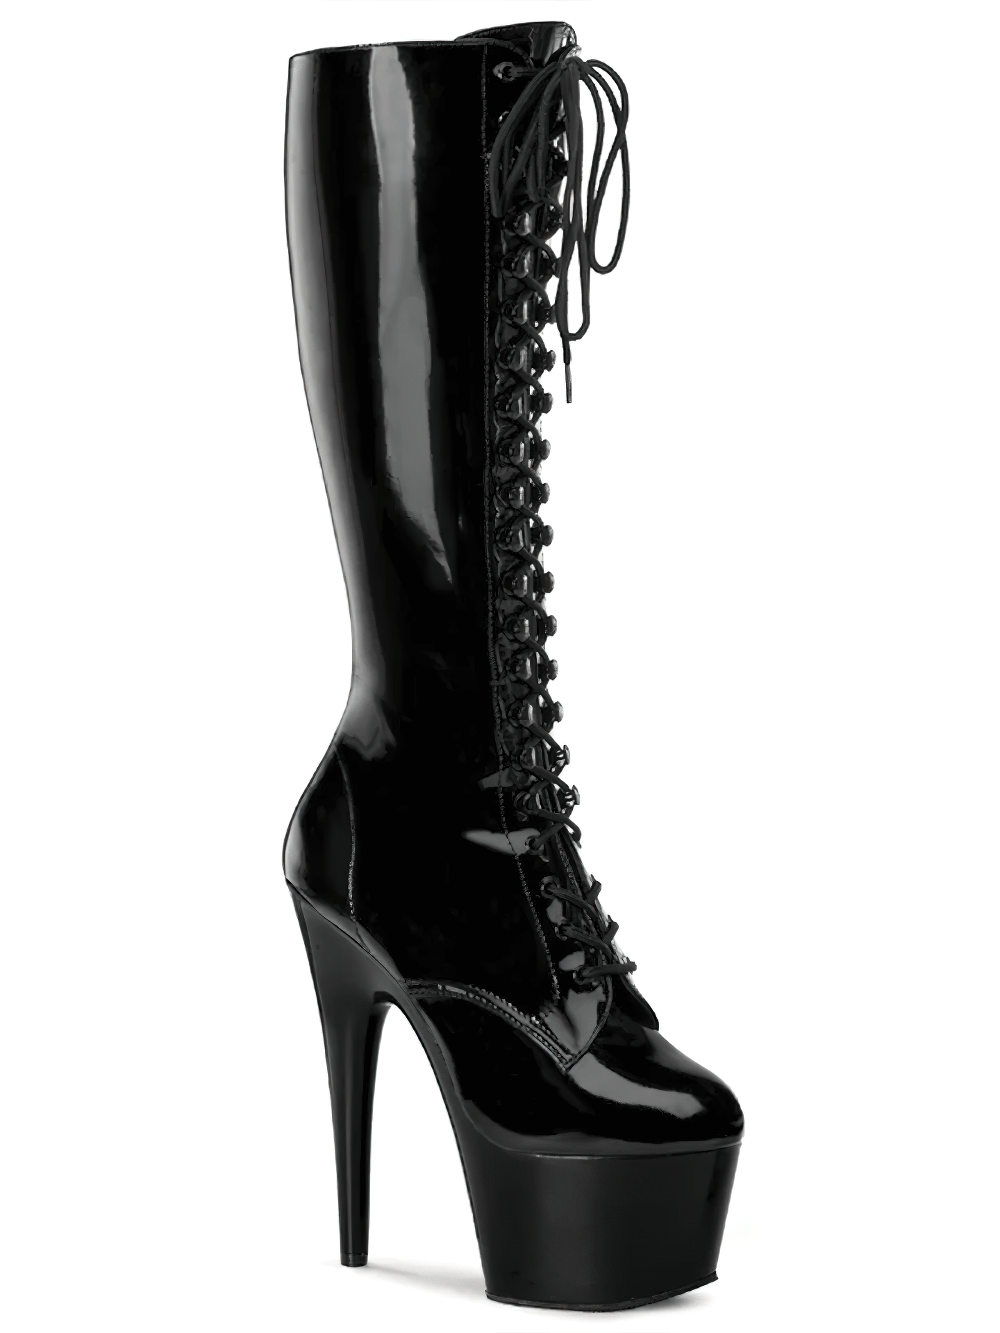 PLEASER Stiletto Heels Lace-Up Knee-High Boots